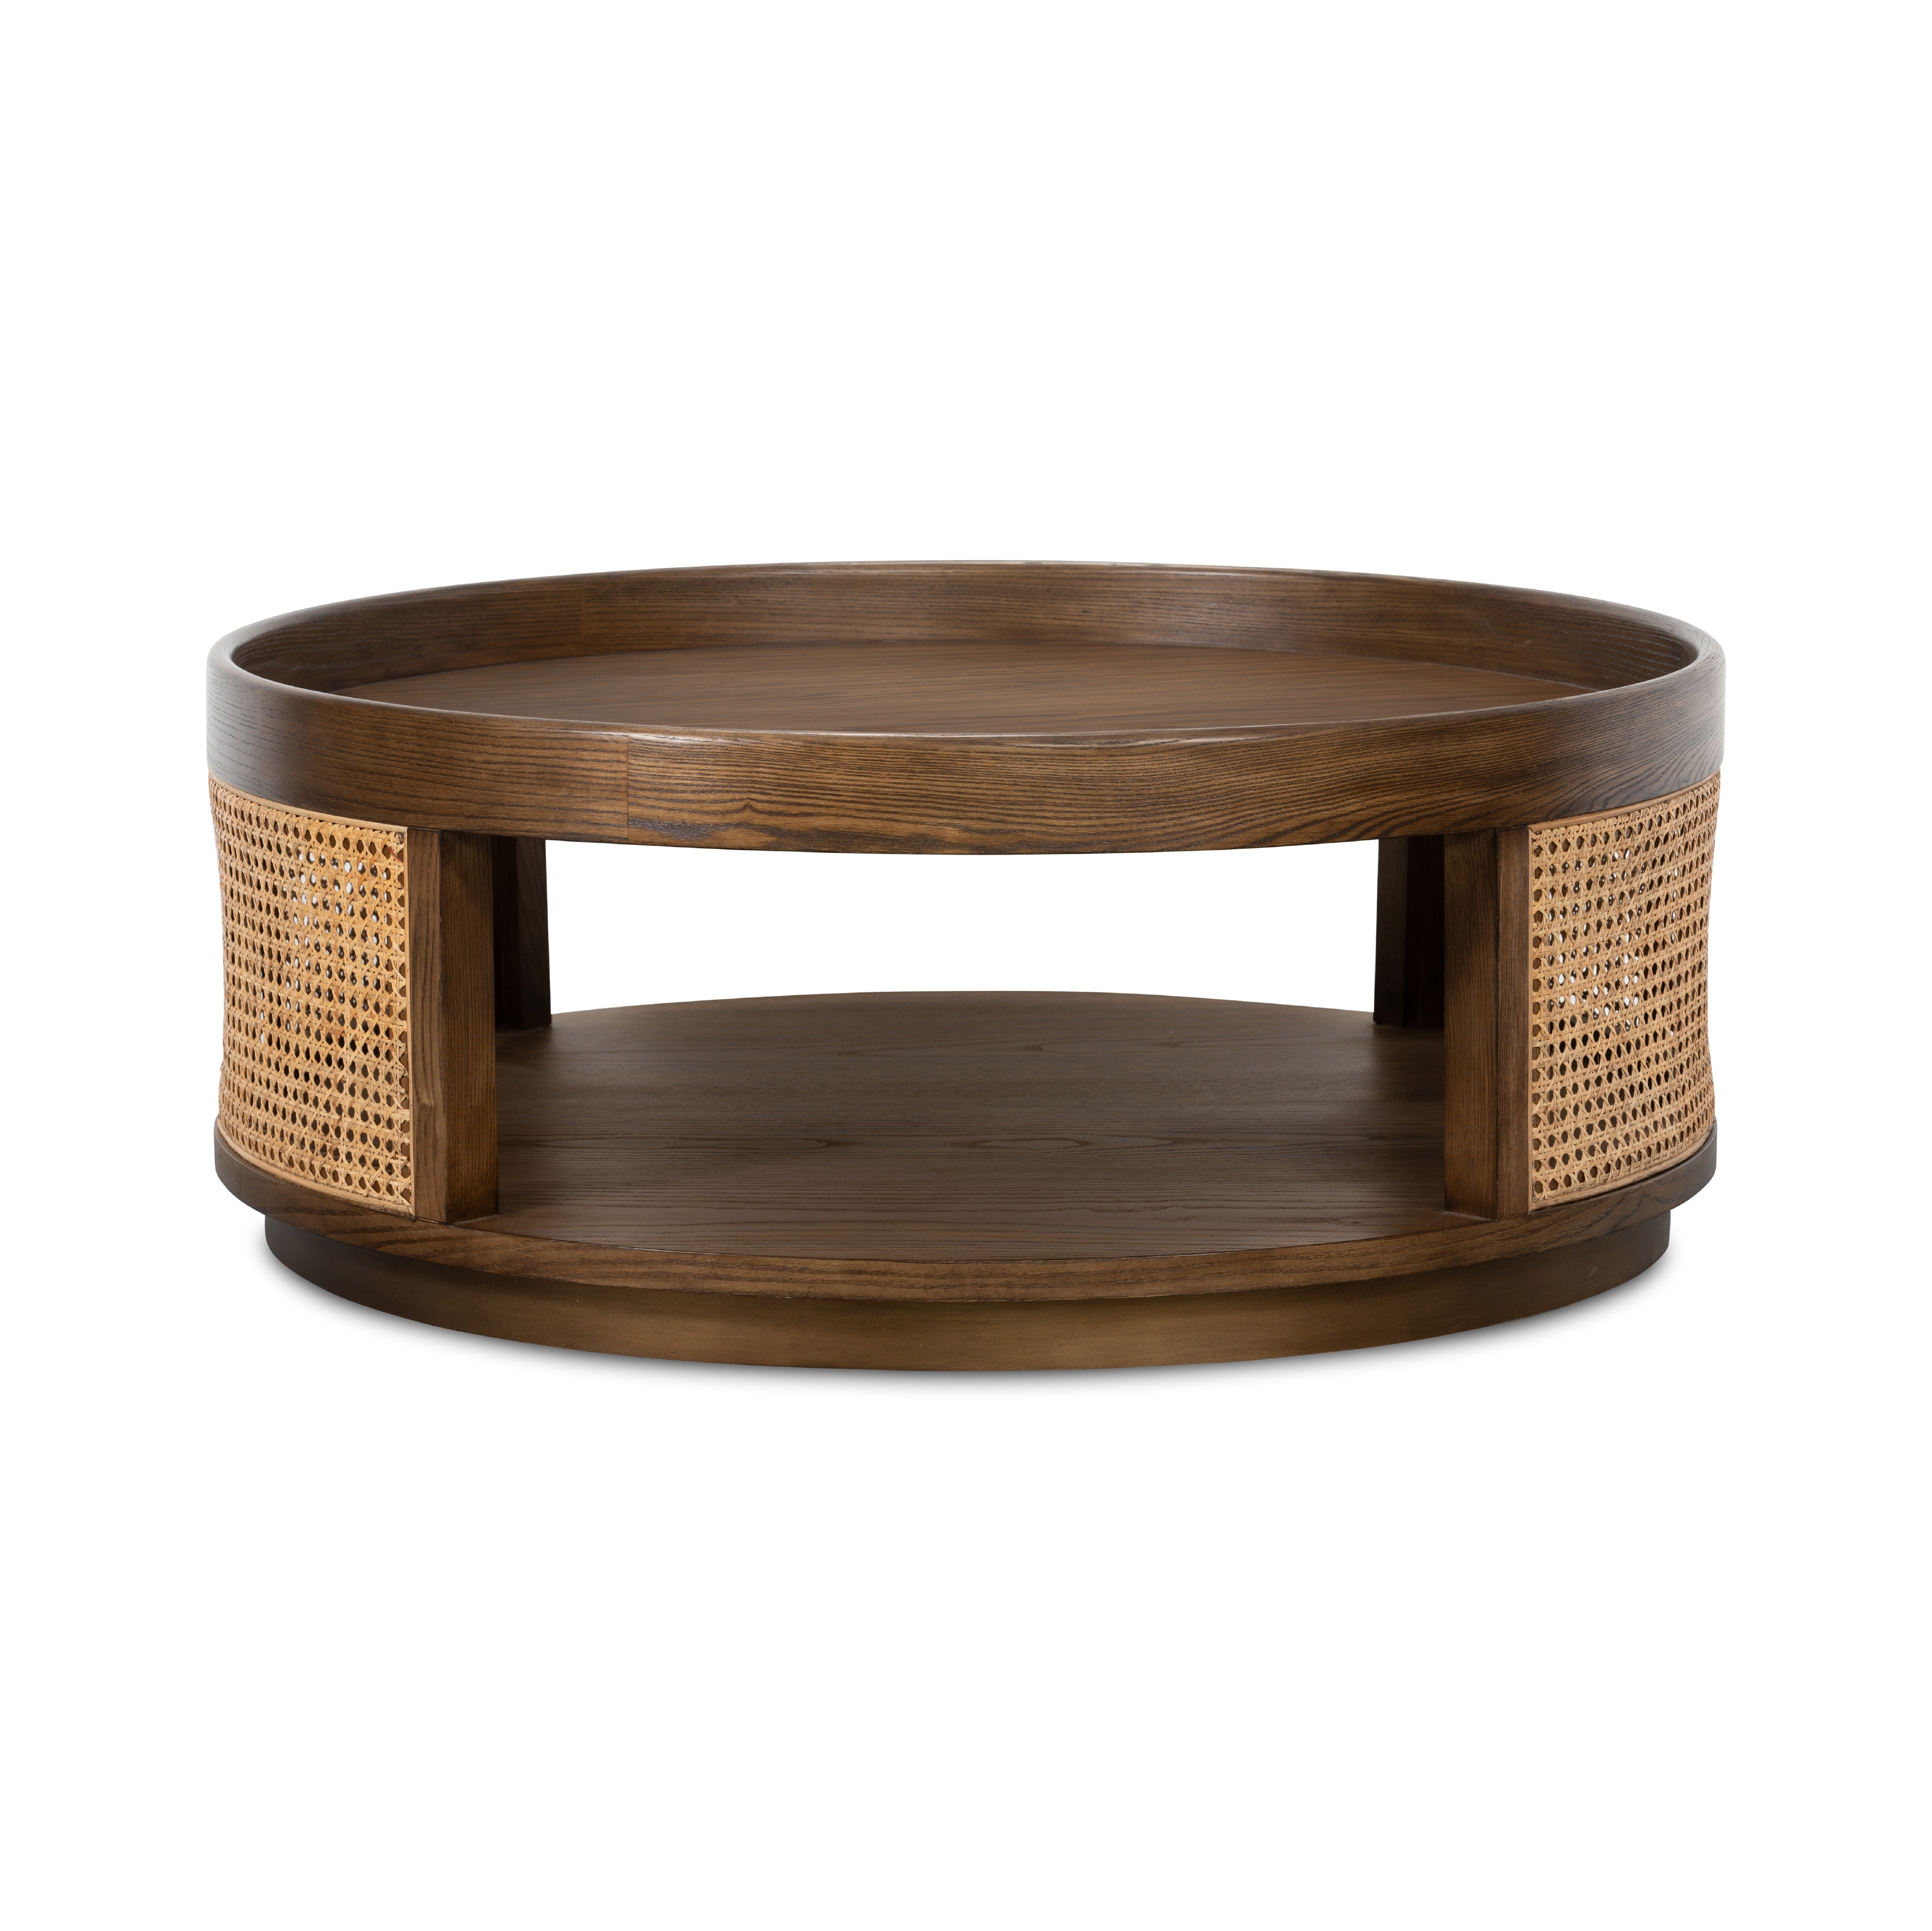 Lee Coffee Table-Natural Ash - Image 3